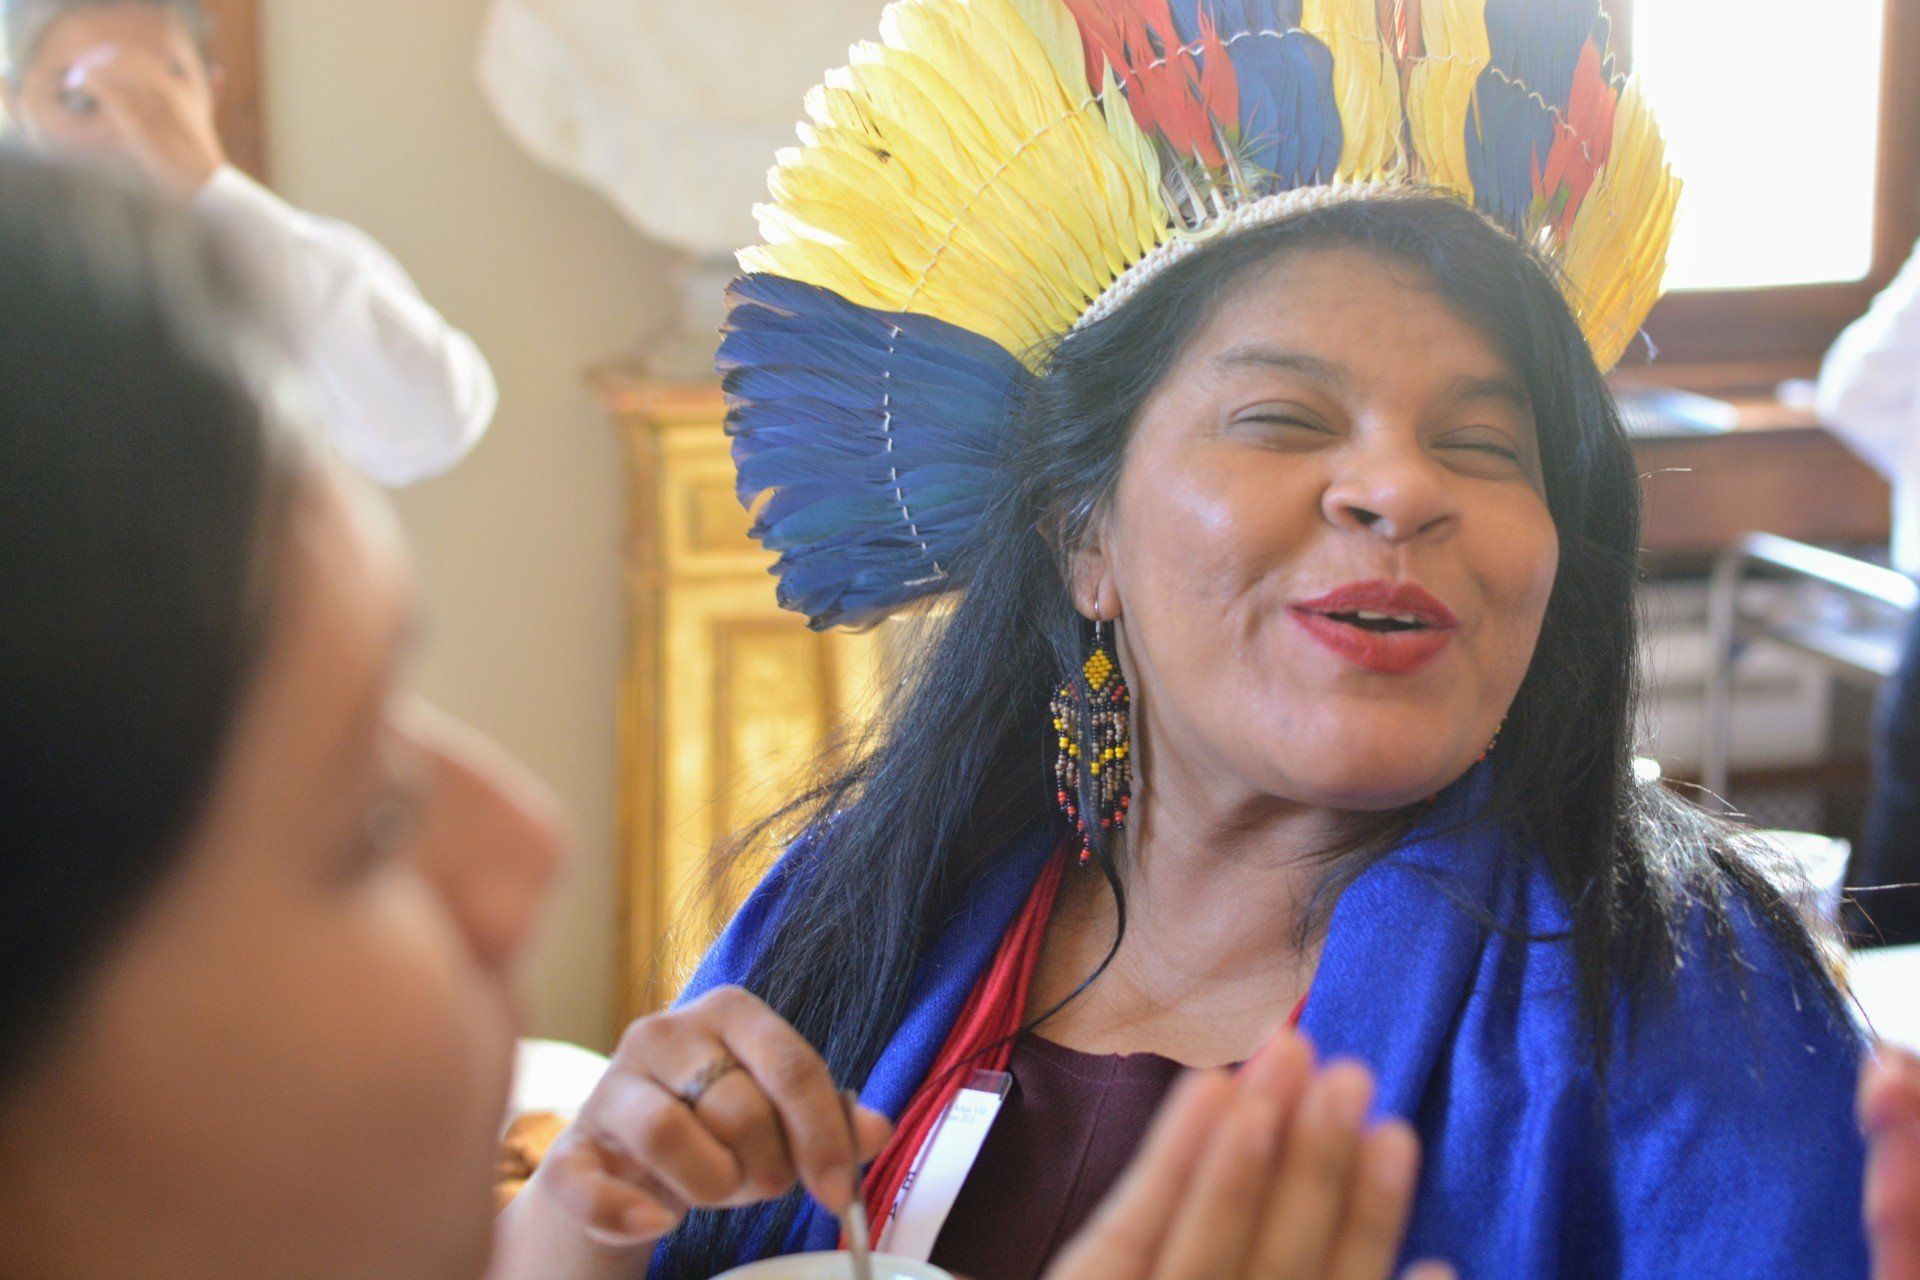 An Indigenous lady wearing a yellow blue and red head dress meeting and talking with others